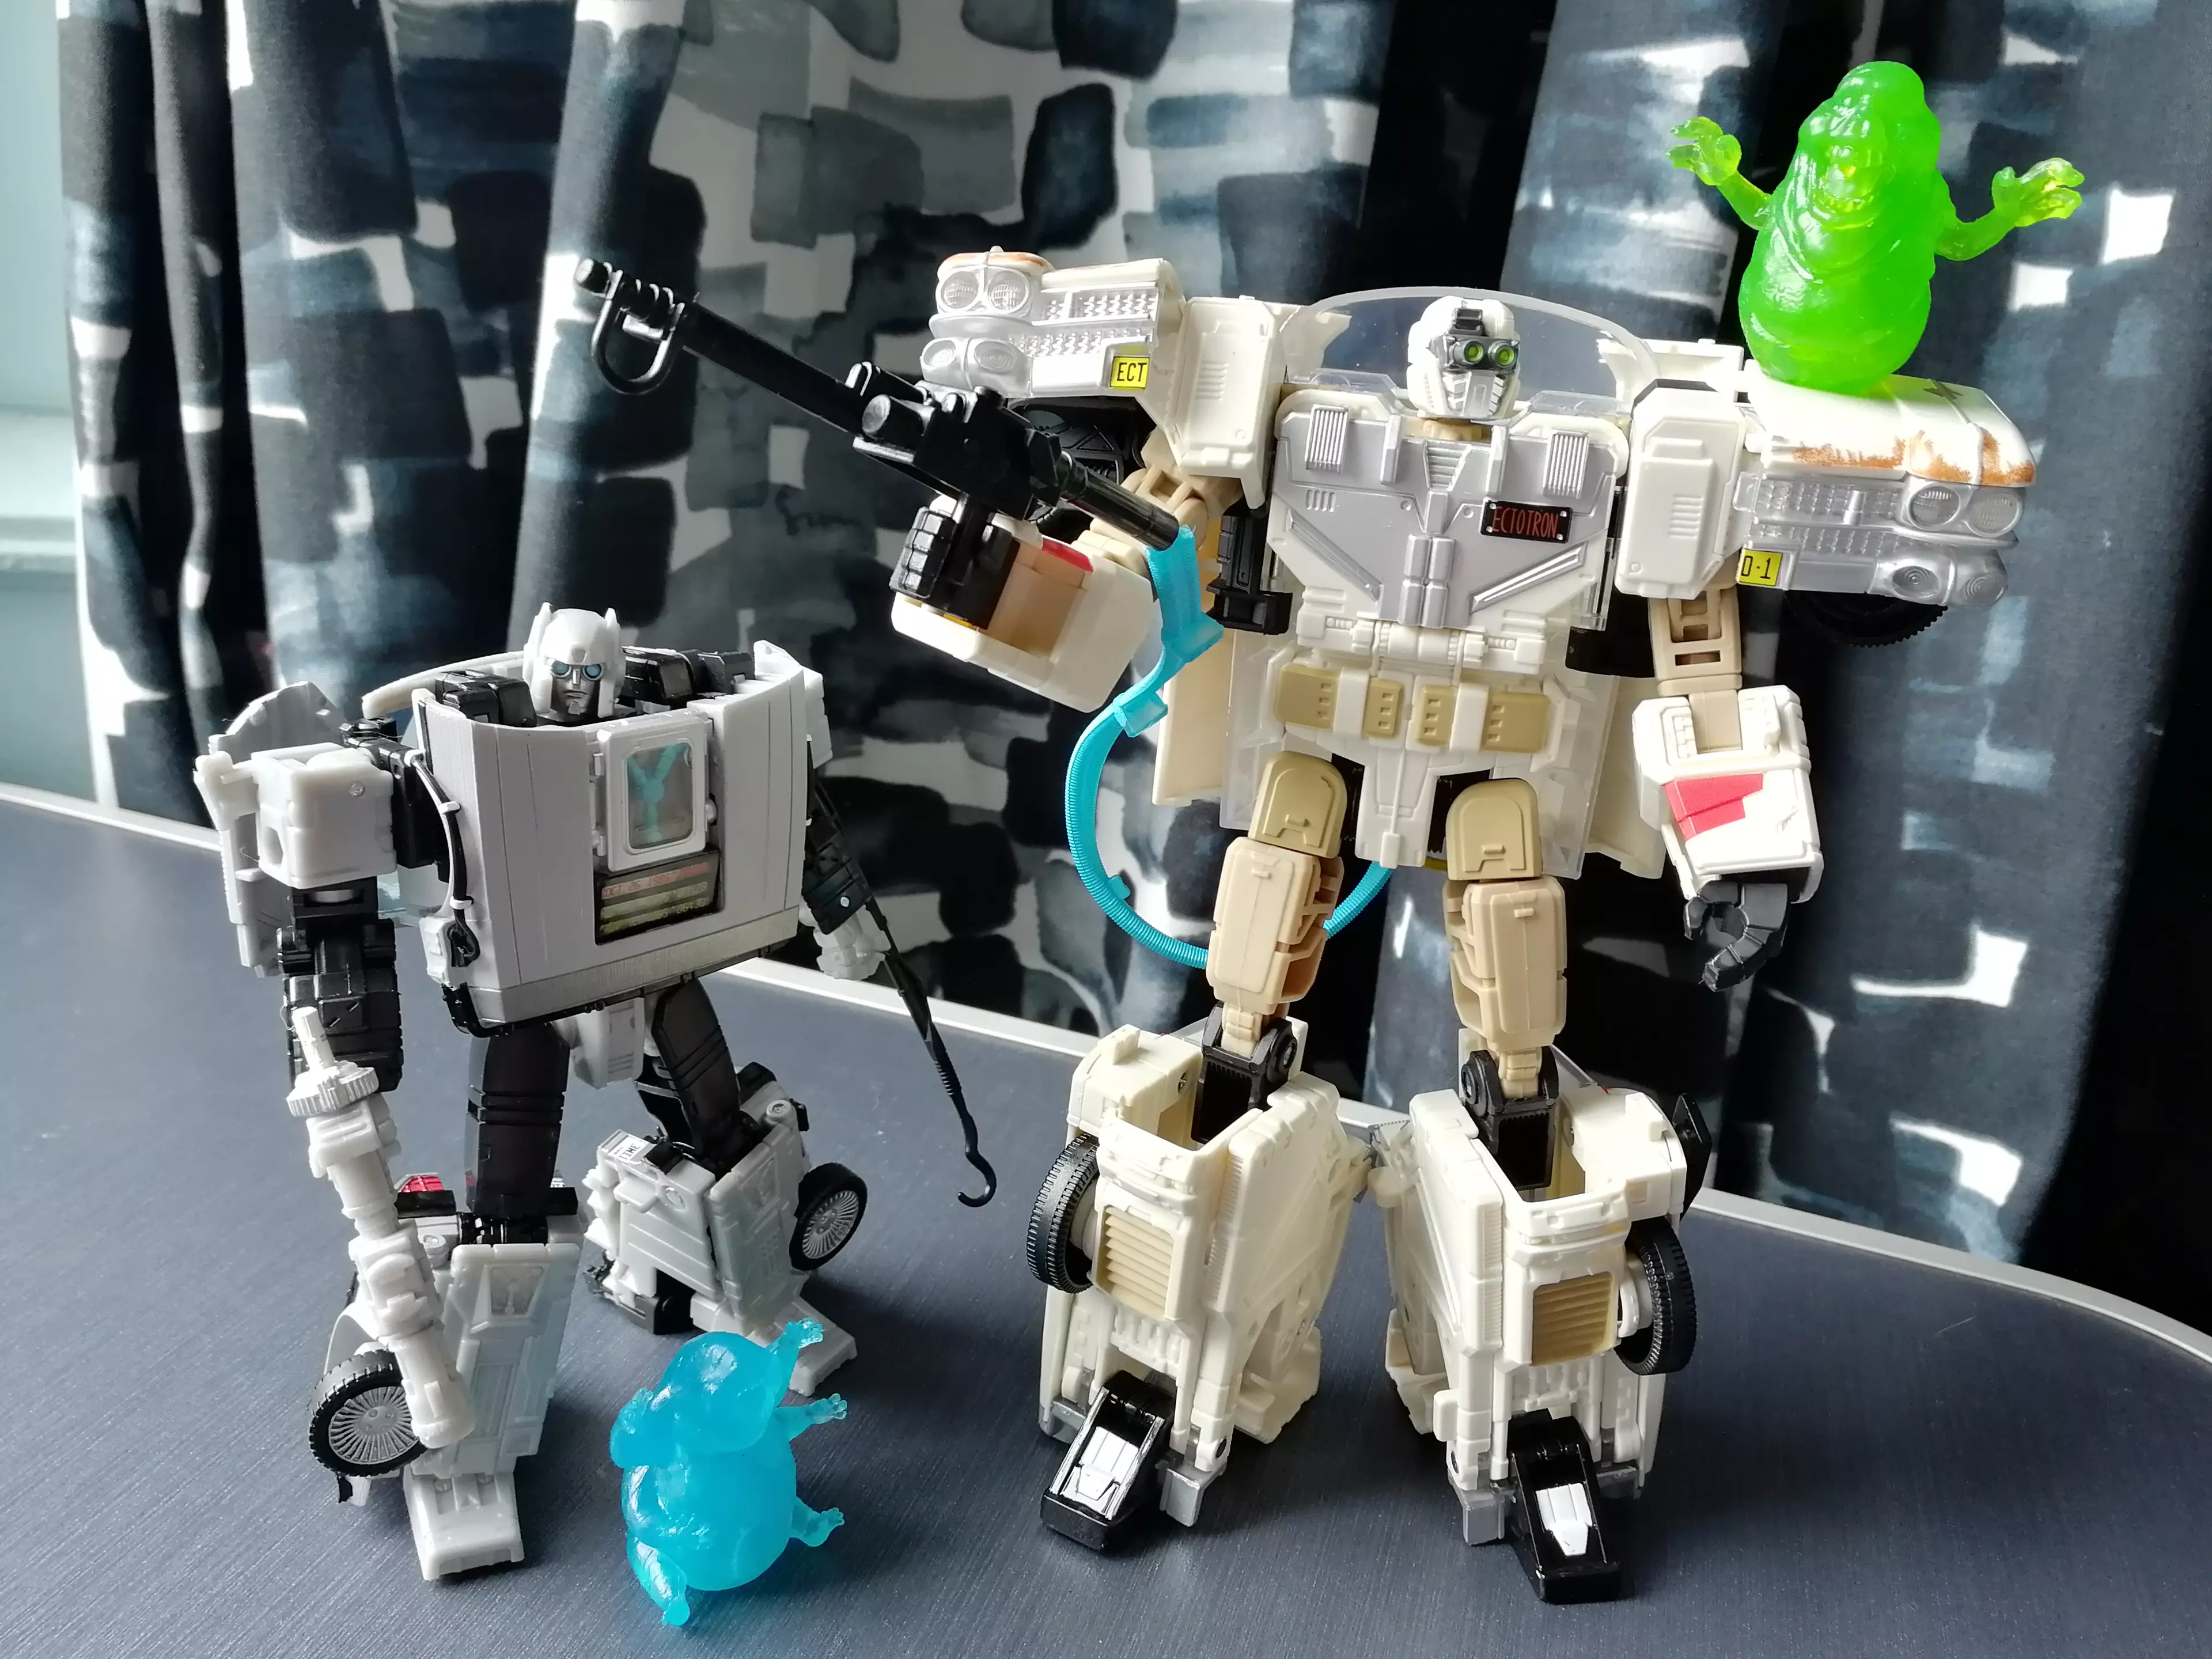 Ectotron and Gigawatt, side by side